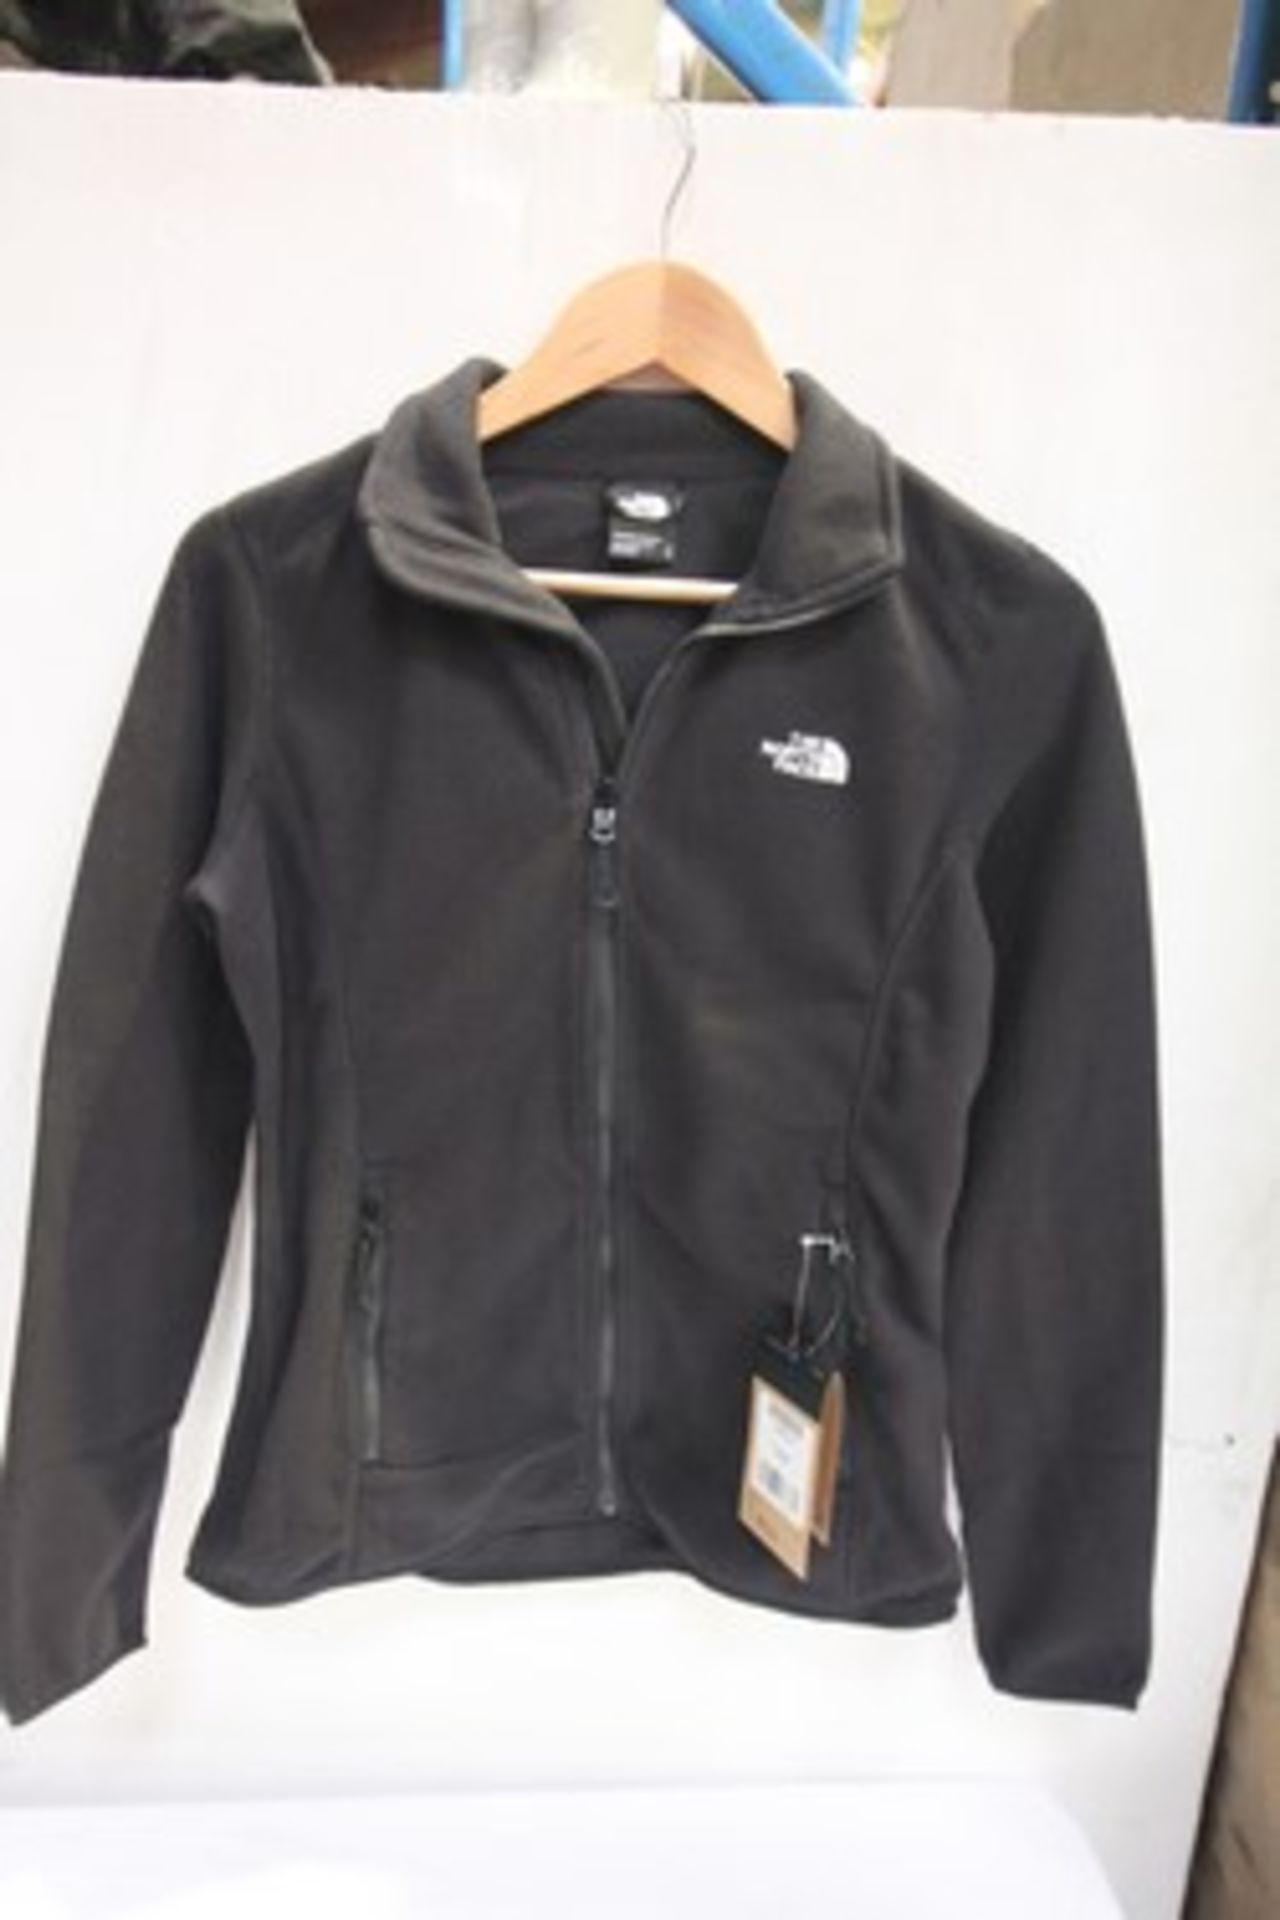 3 x North Face black zip up jackets, style Glazier, 2 x size S and 1 x size XS- New in pack (E1A)